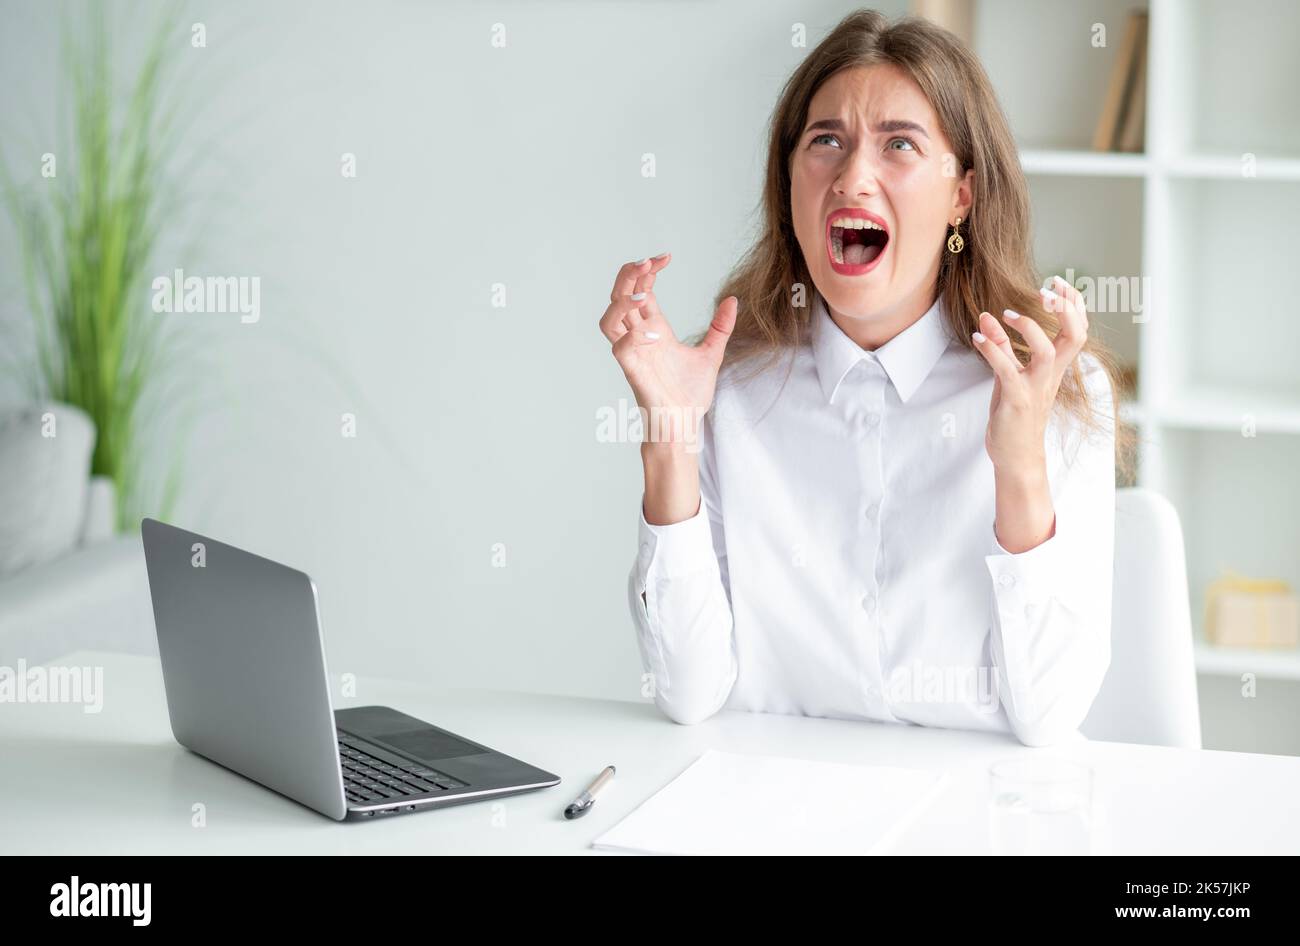 furious anger office woman work difficulties Stock Photo